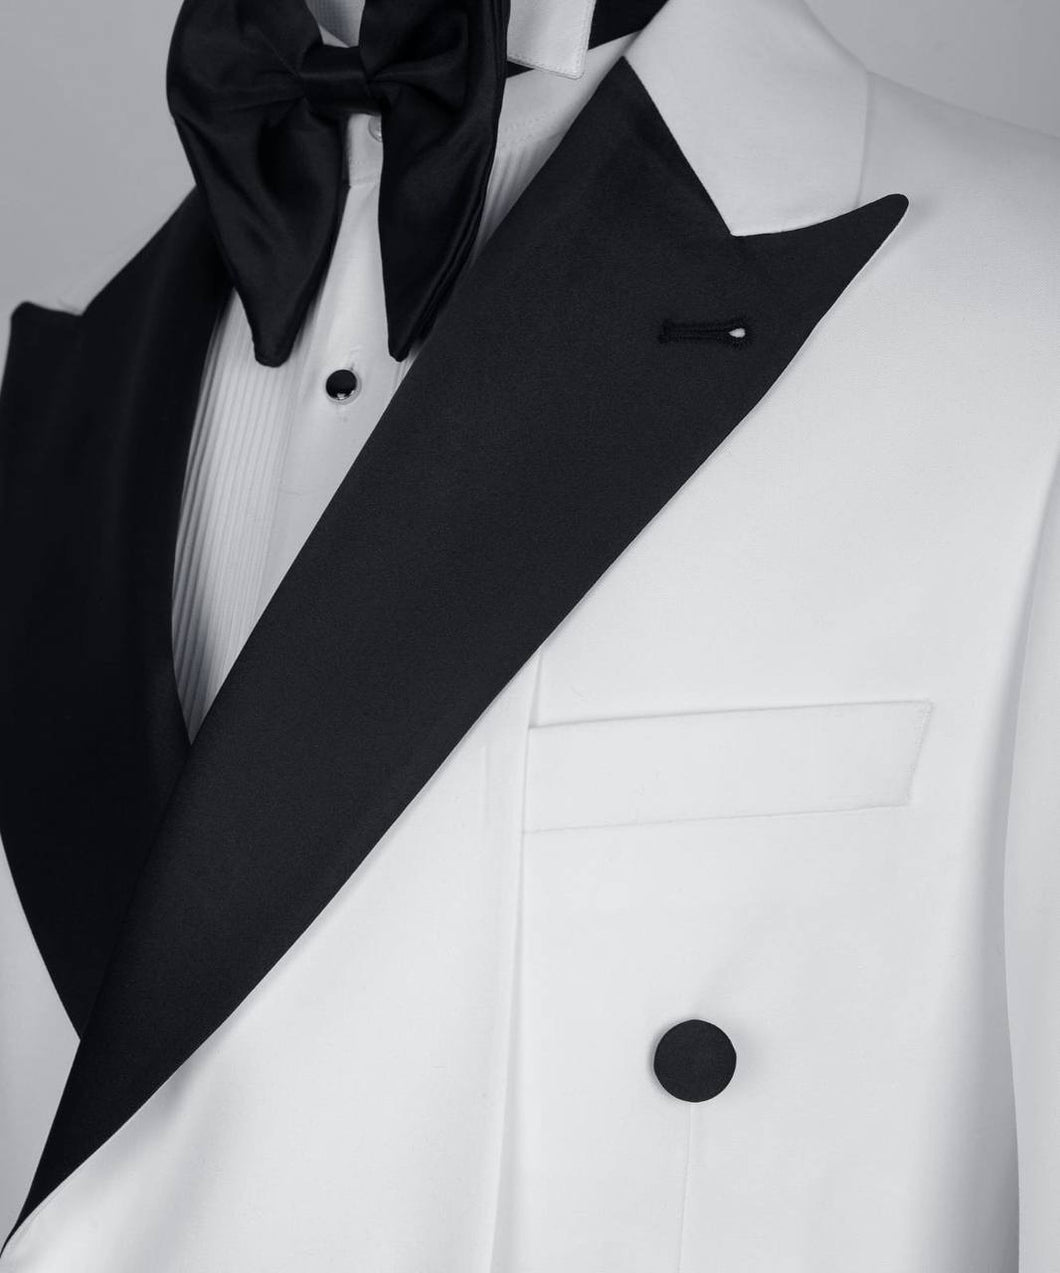 Men’s White Black double breasted suit